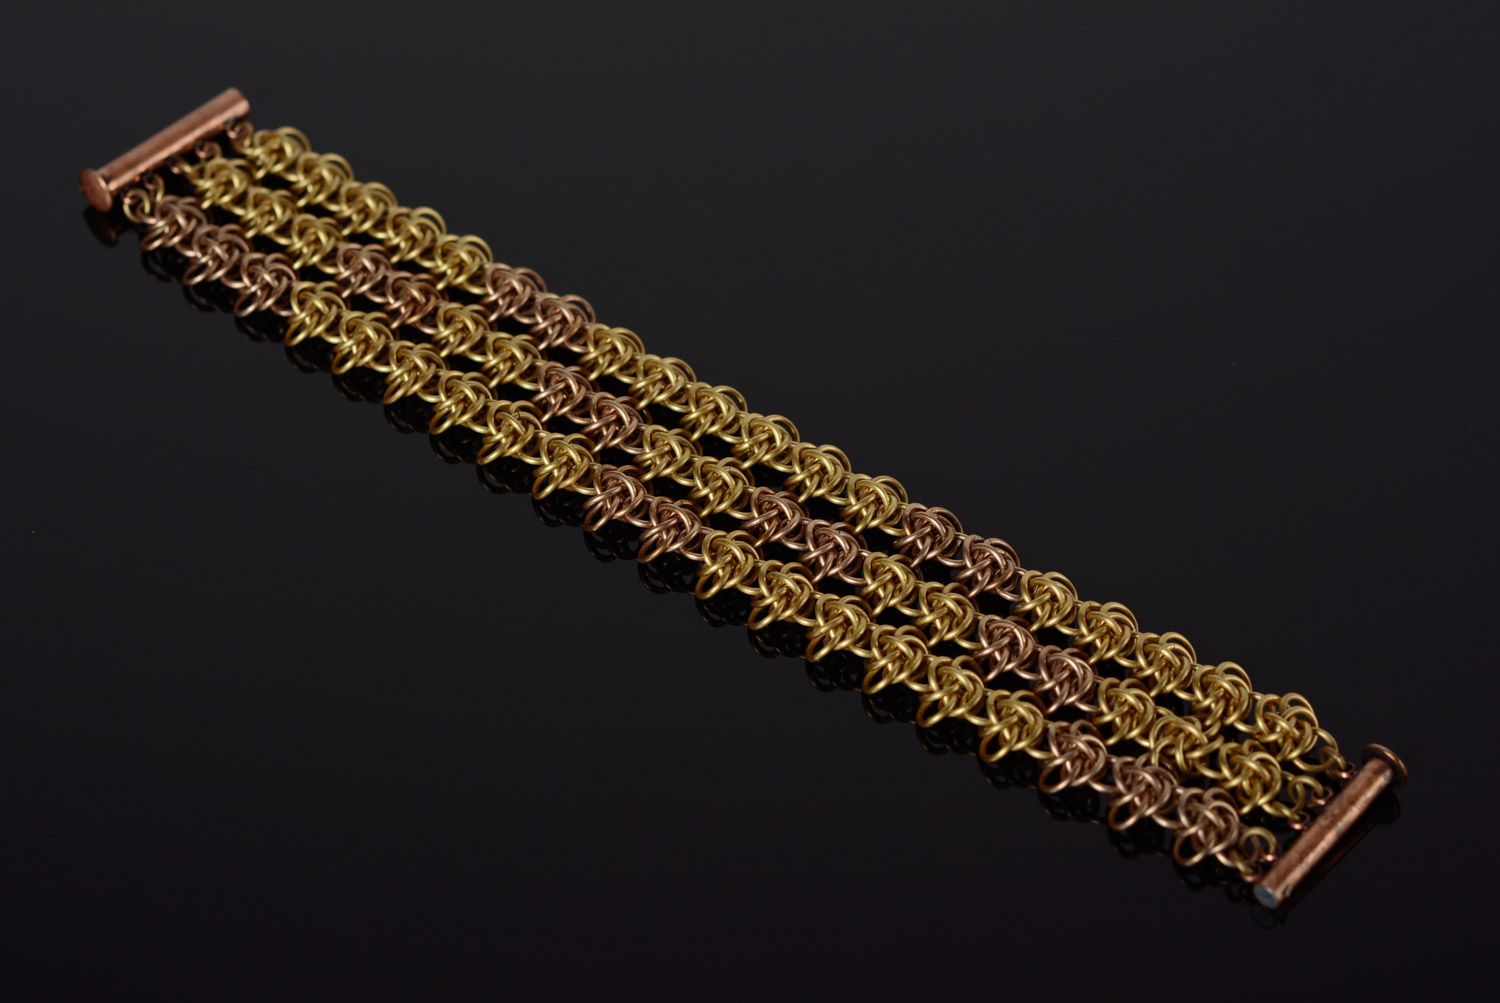 Handmade chainmaille wrist bracelet woven of bronze and brass links photo 1